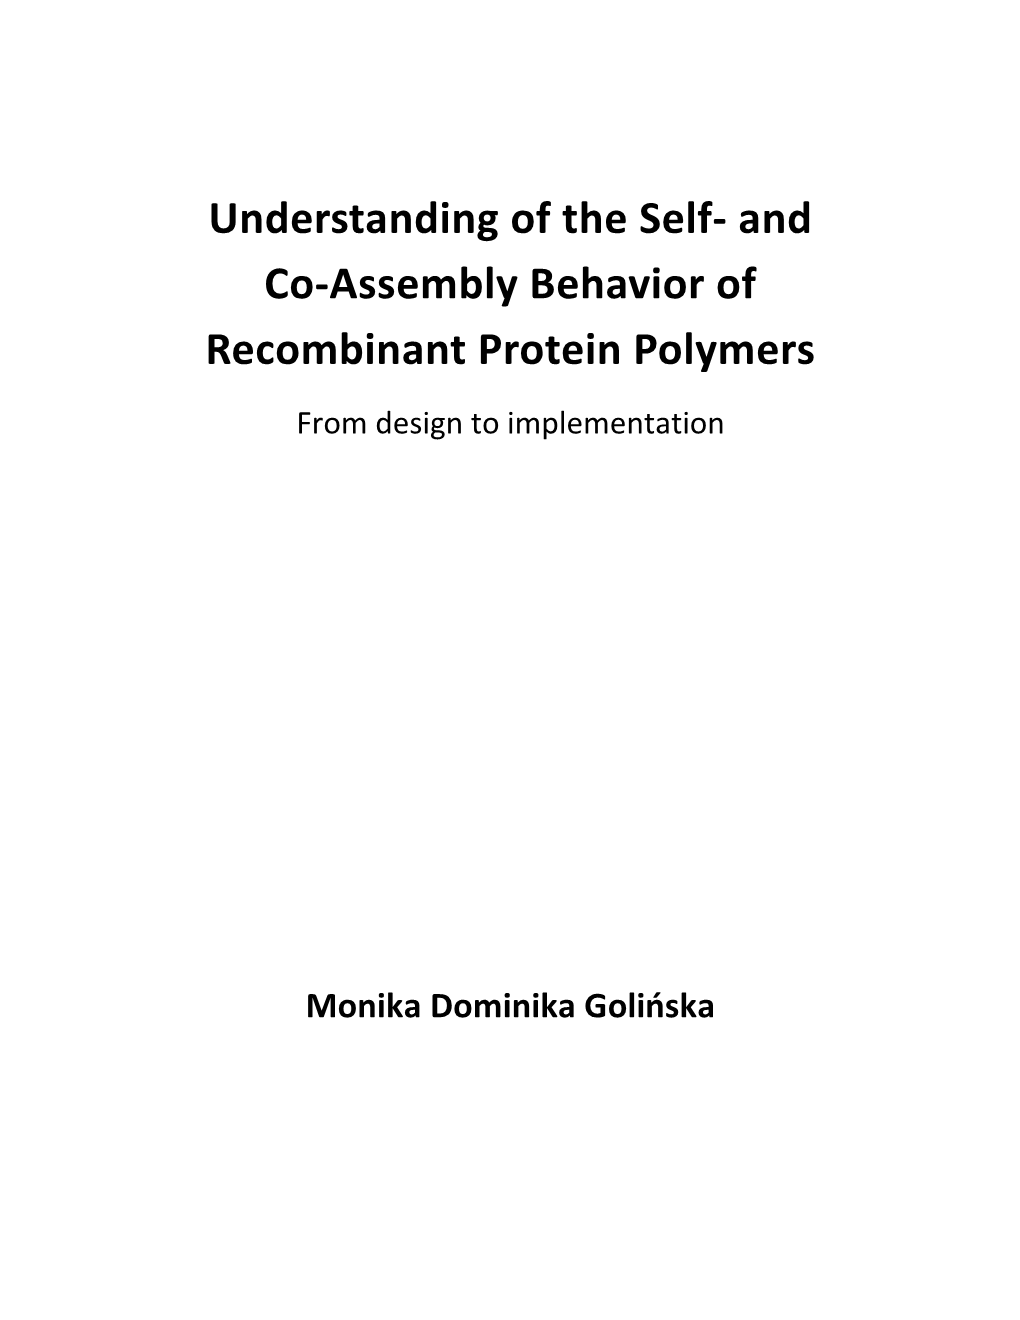 And Co-Assembly Behavior of Recombinant Protein Polymers from Design to Implementation